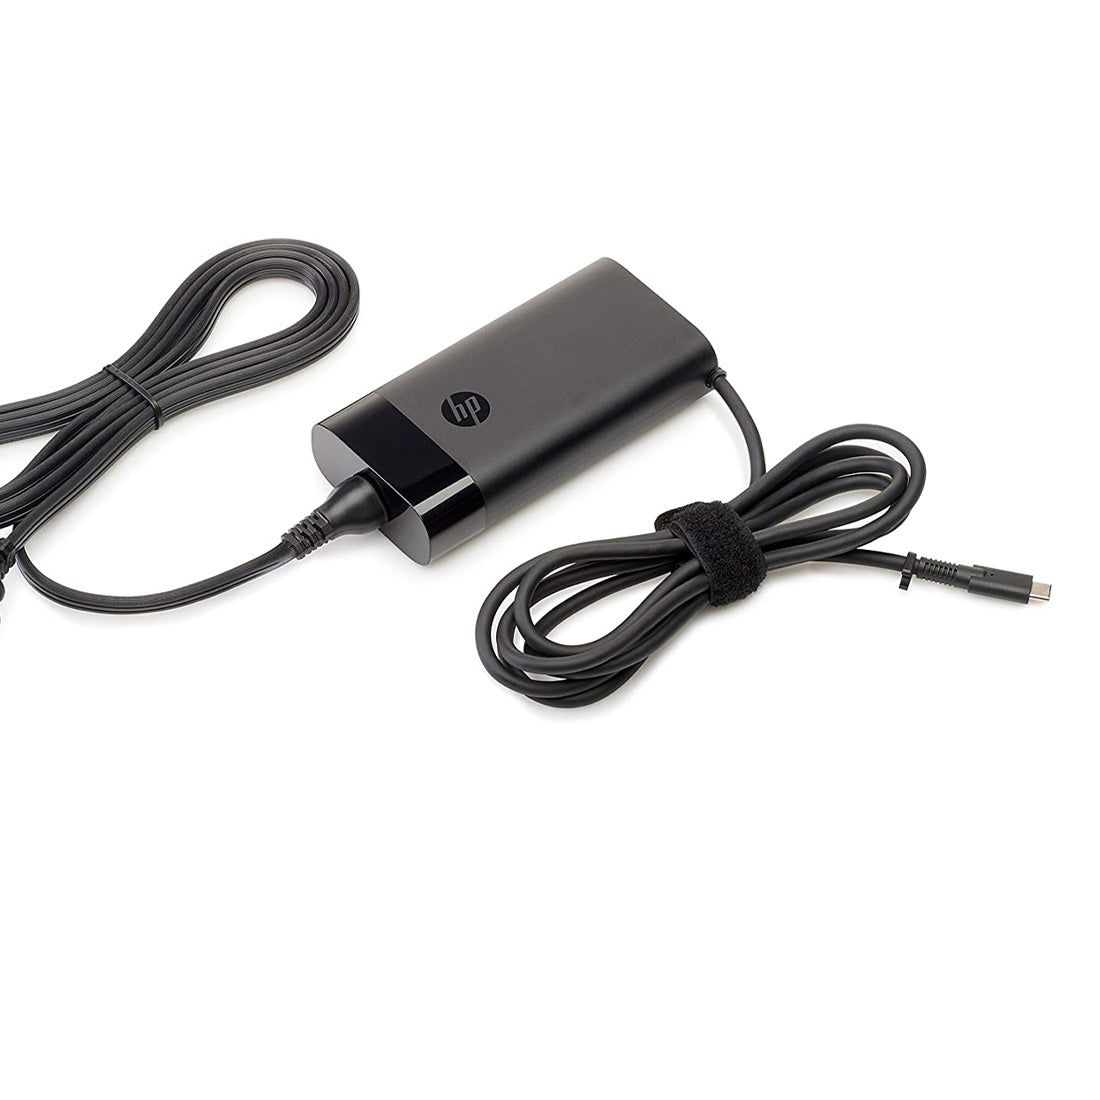 HP Original 90W USB-C Pin Laptop Charger Adapter with Power Cord